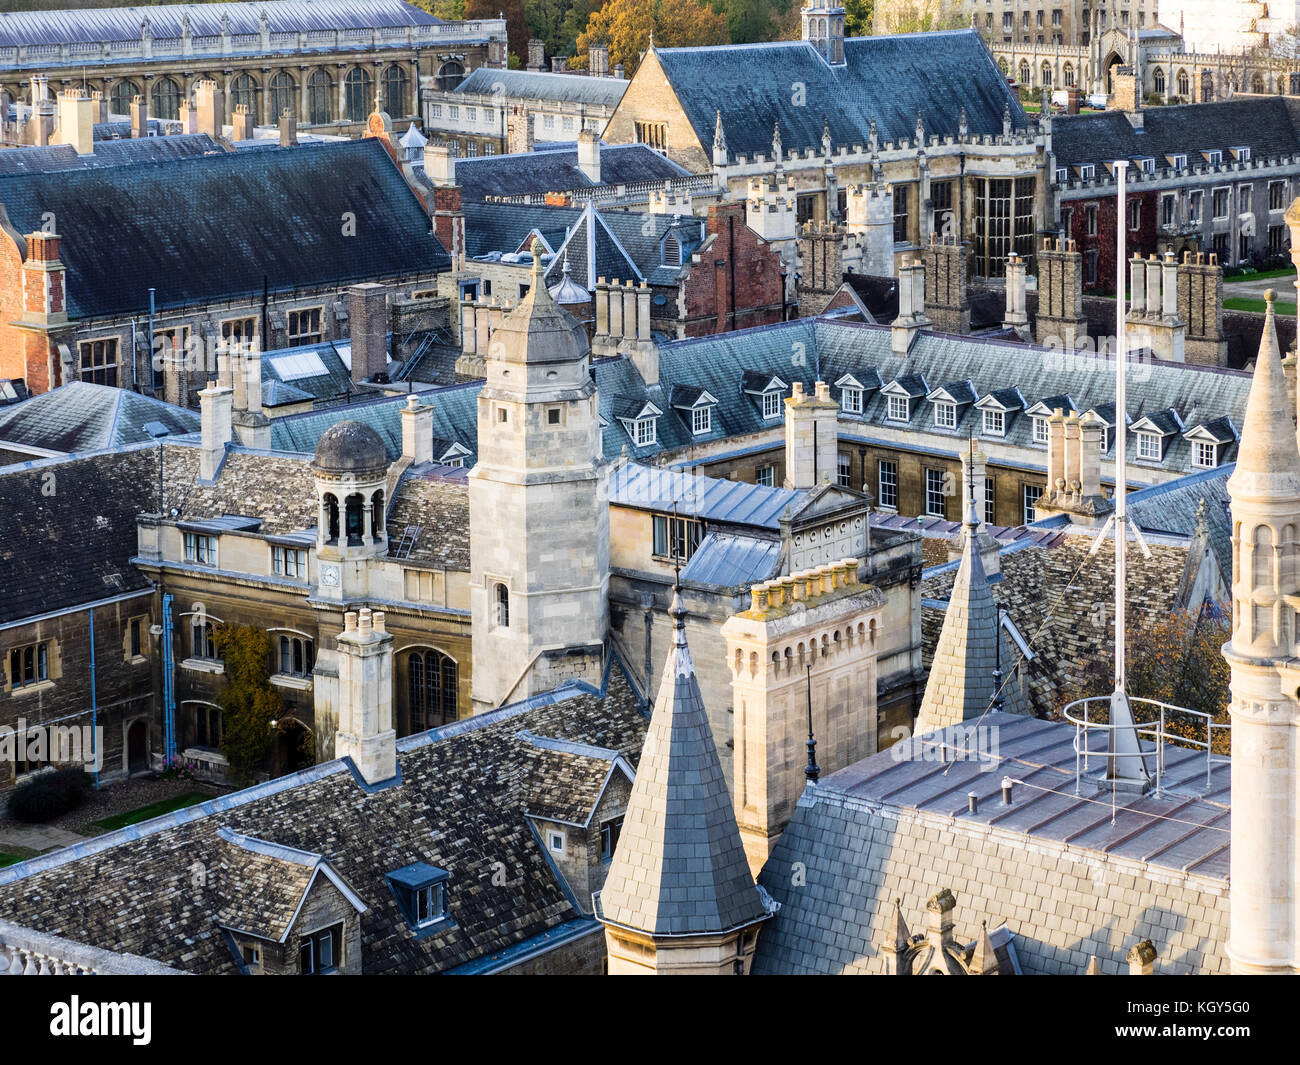 Cambridge Rooftops - view over the rooftops of part of Cambridge University, including Gonville and Caius, Trinity and St John's colleges. Stock Photo